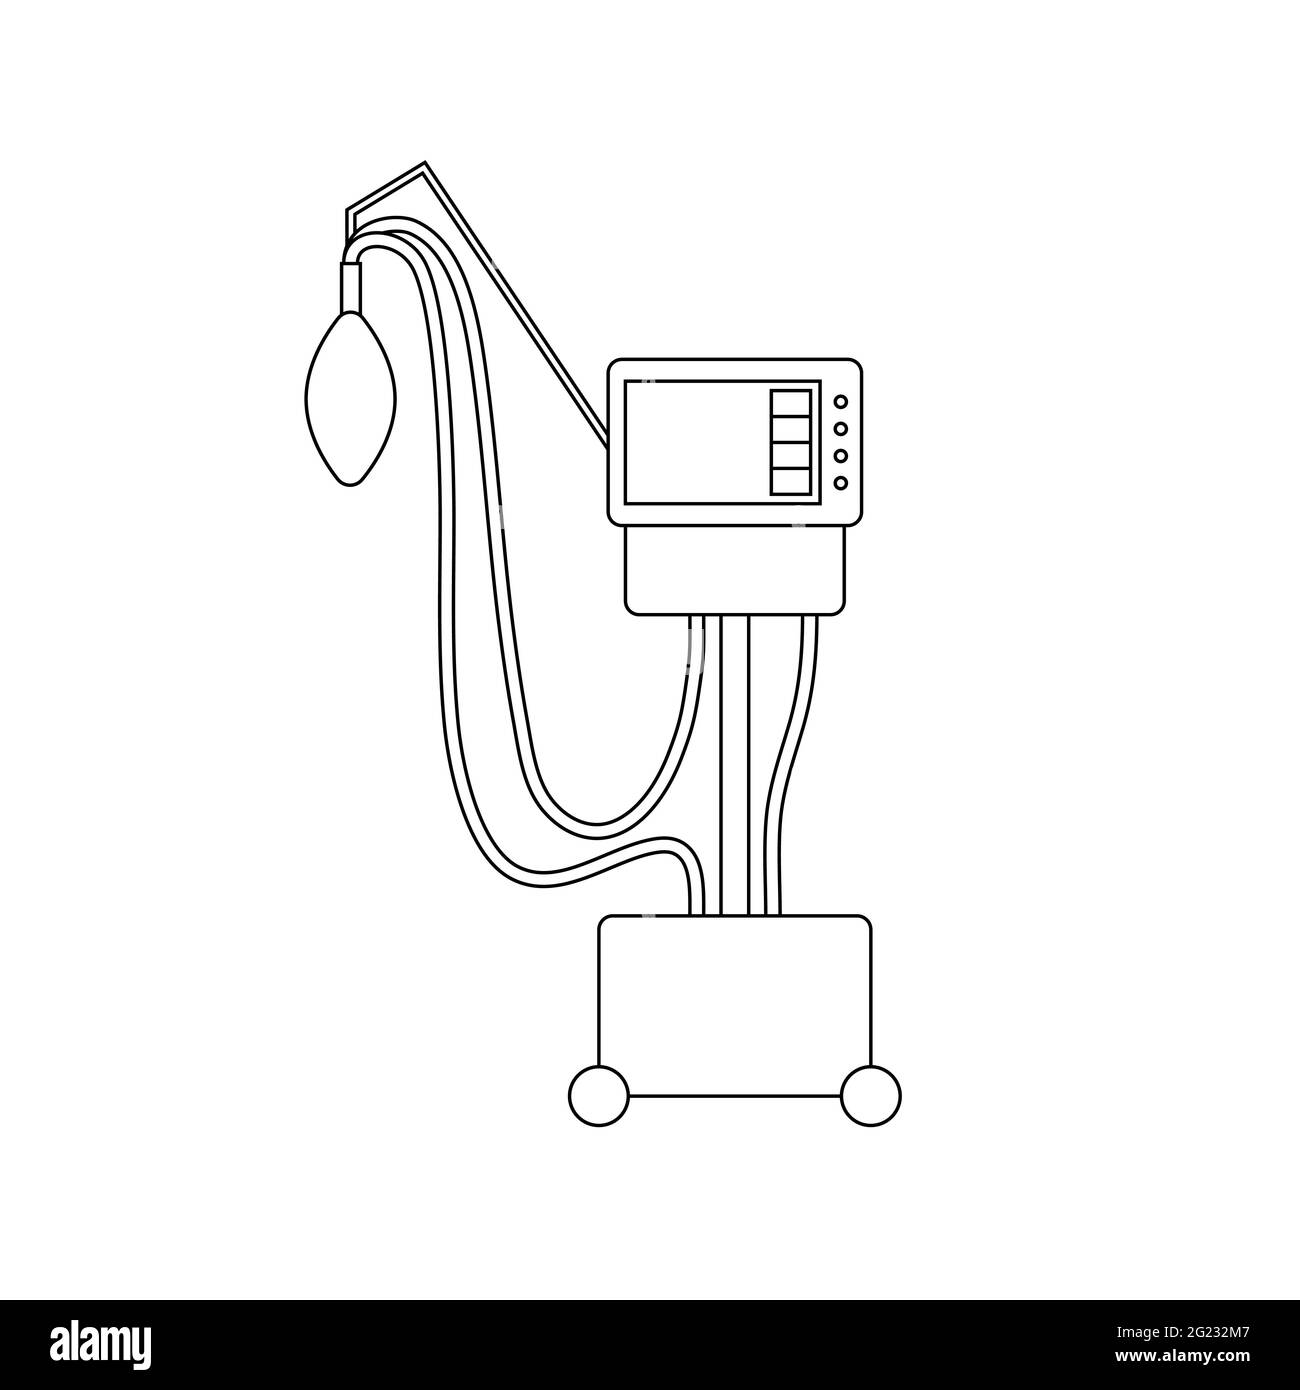 Medical ventilator line icon. Outline mechanical ventilation lungs Machine isolated on white background. Apparatus to patients having trouble breathin Stock Vector